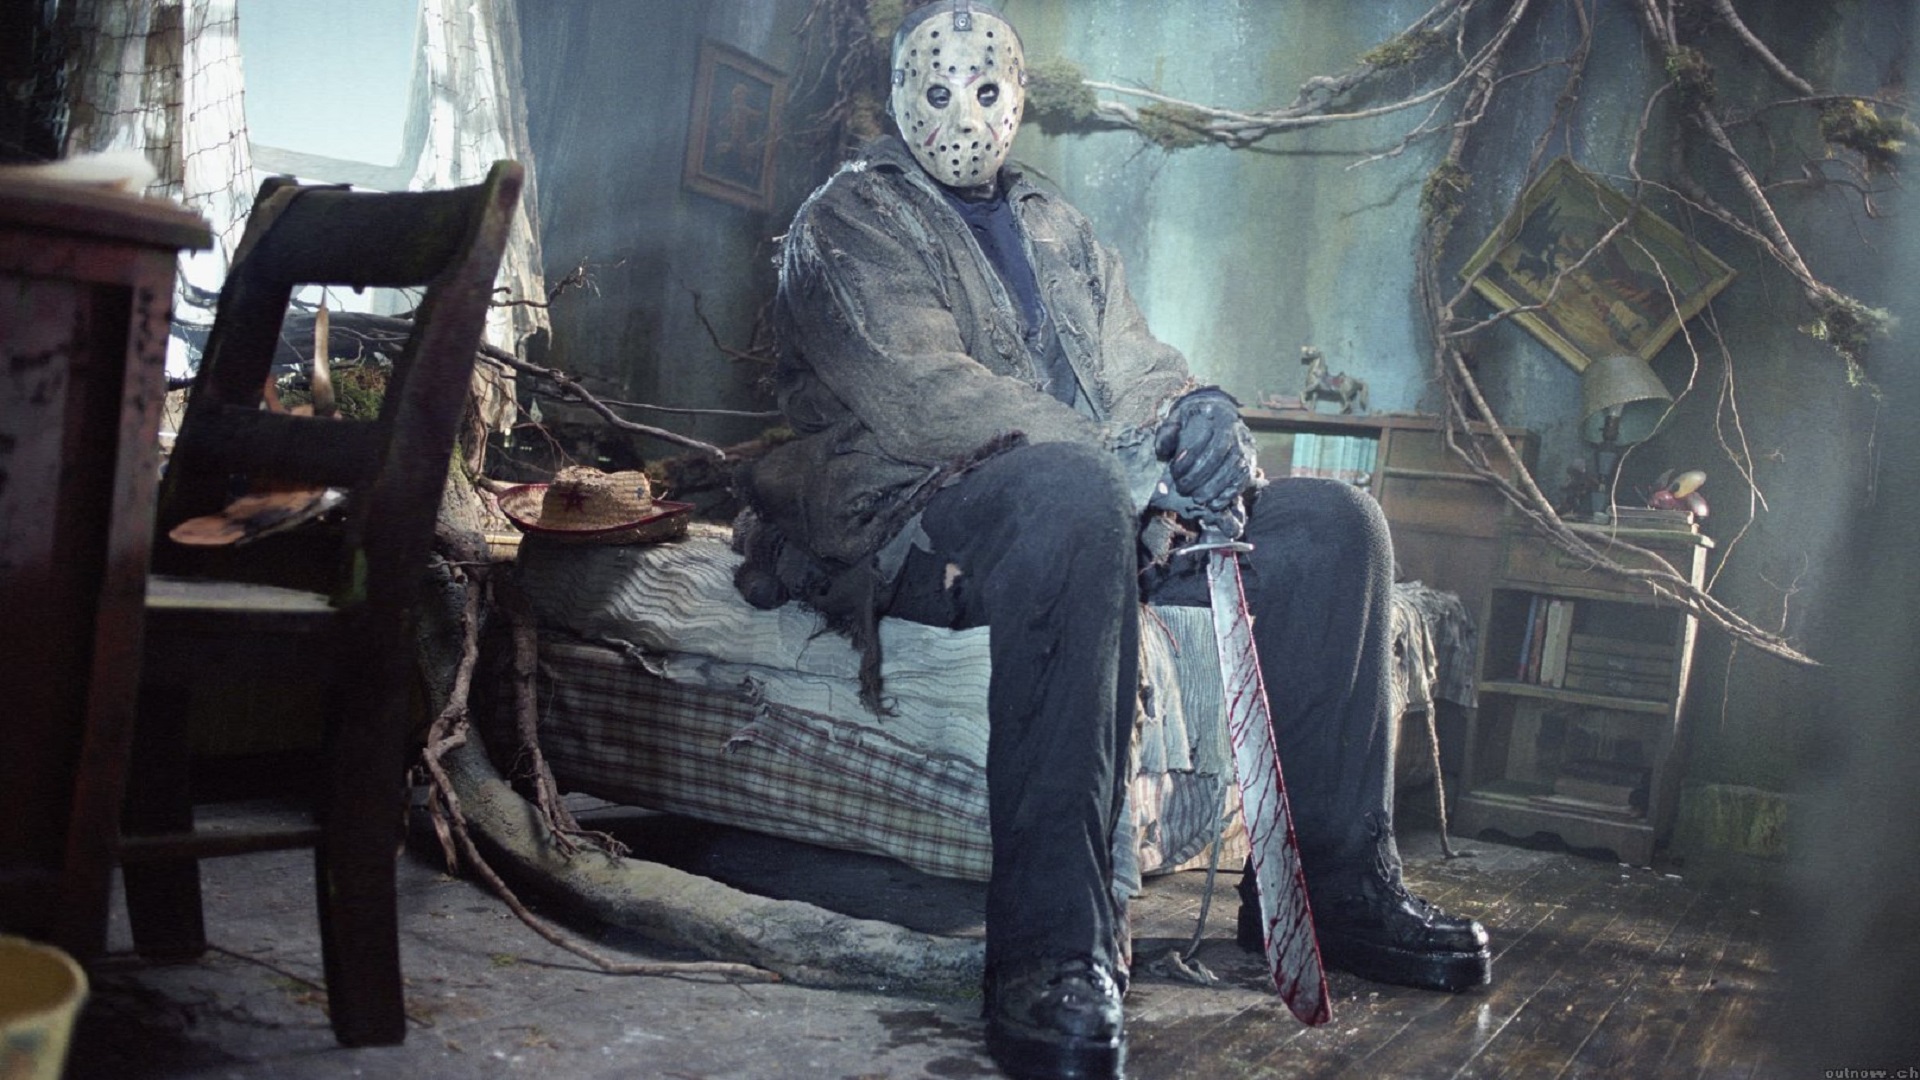 17 Friday The 13th (2009) HD Wallpapers | Backgrounds - Wallpaper ...